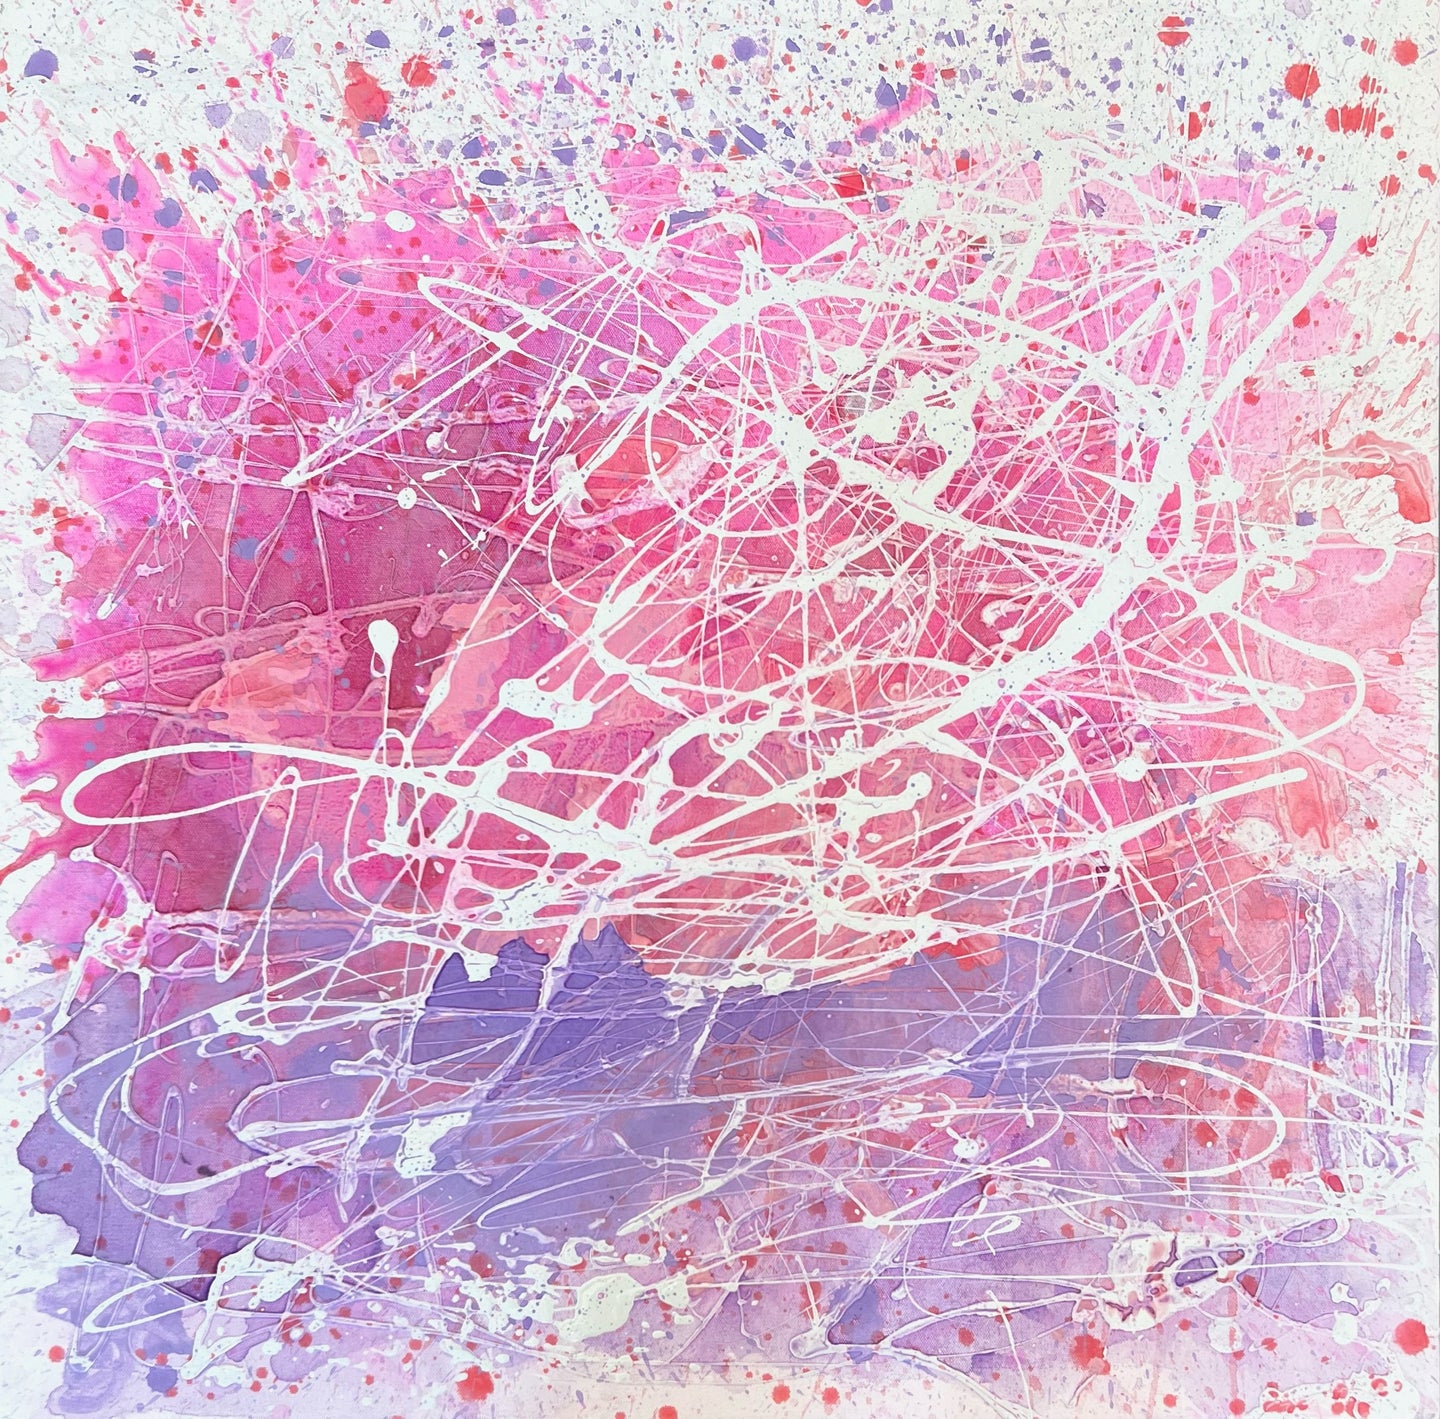 Abstract Expressionist artist J. Steven Manolis', Santa Catalina Sunset 3, pink and purples abstract wall art on canvas, 2023, Acrylic on paper, 30 x 30 inches